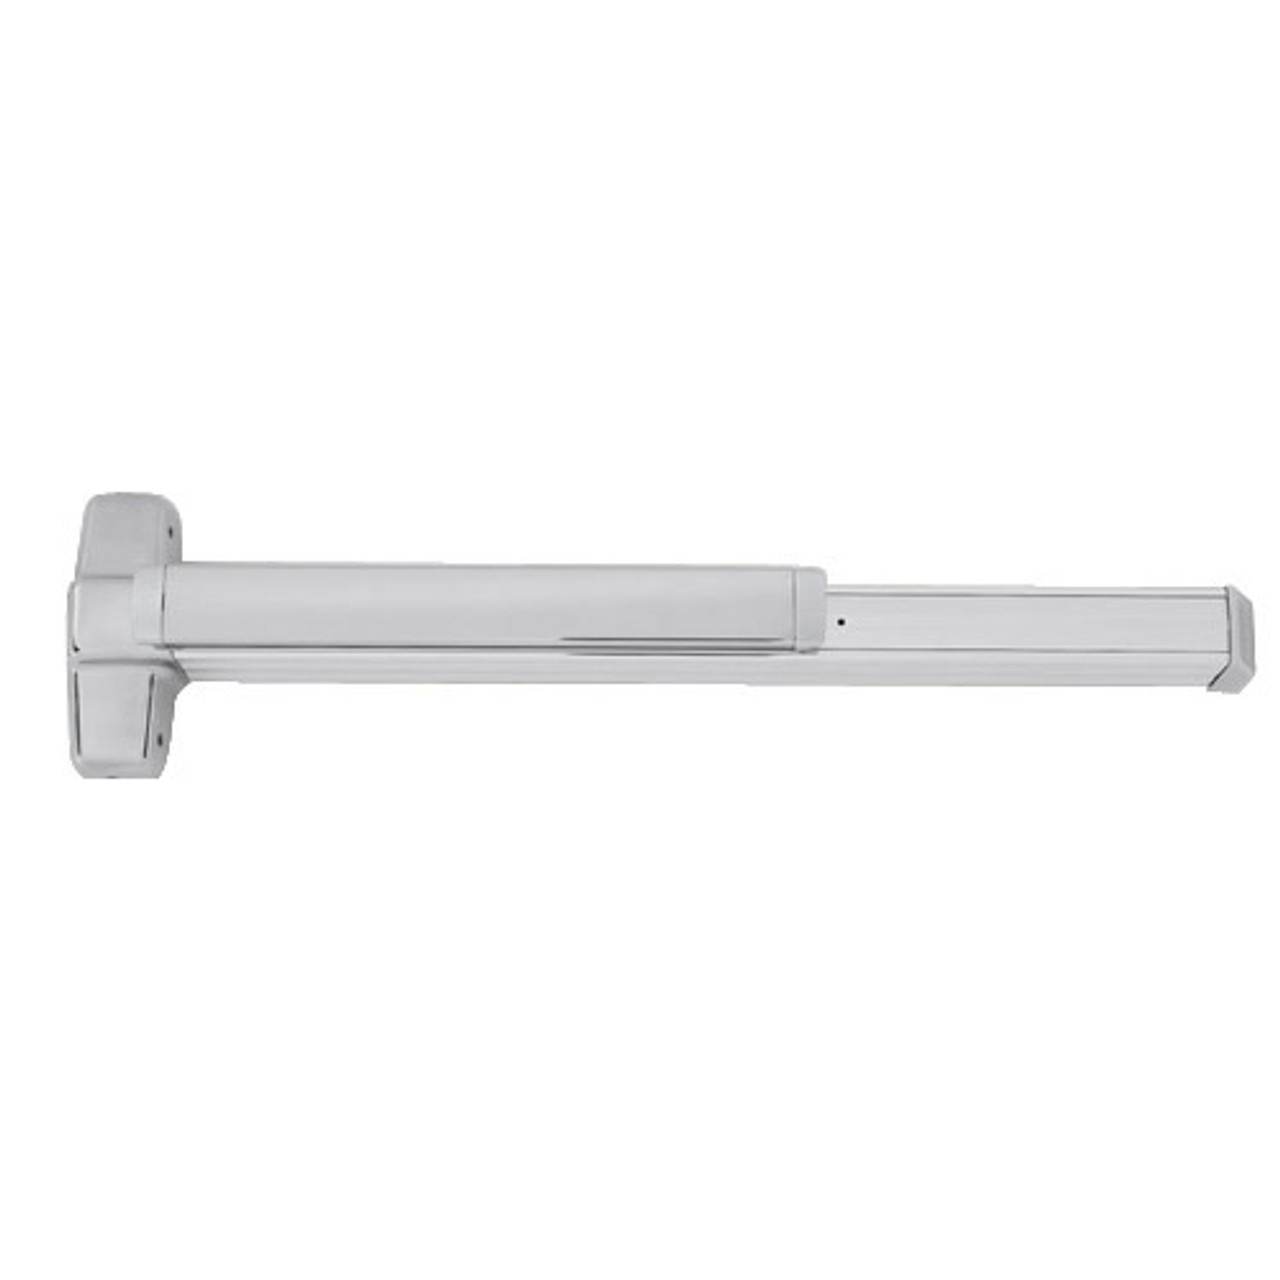 EL9847WDC-EO-US32D-3 Von Duprin Exit Device with Electric Latch Retraction in Satin Stainless